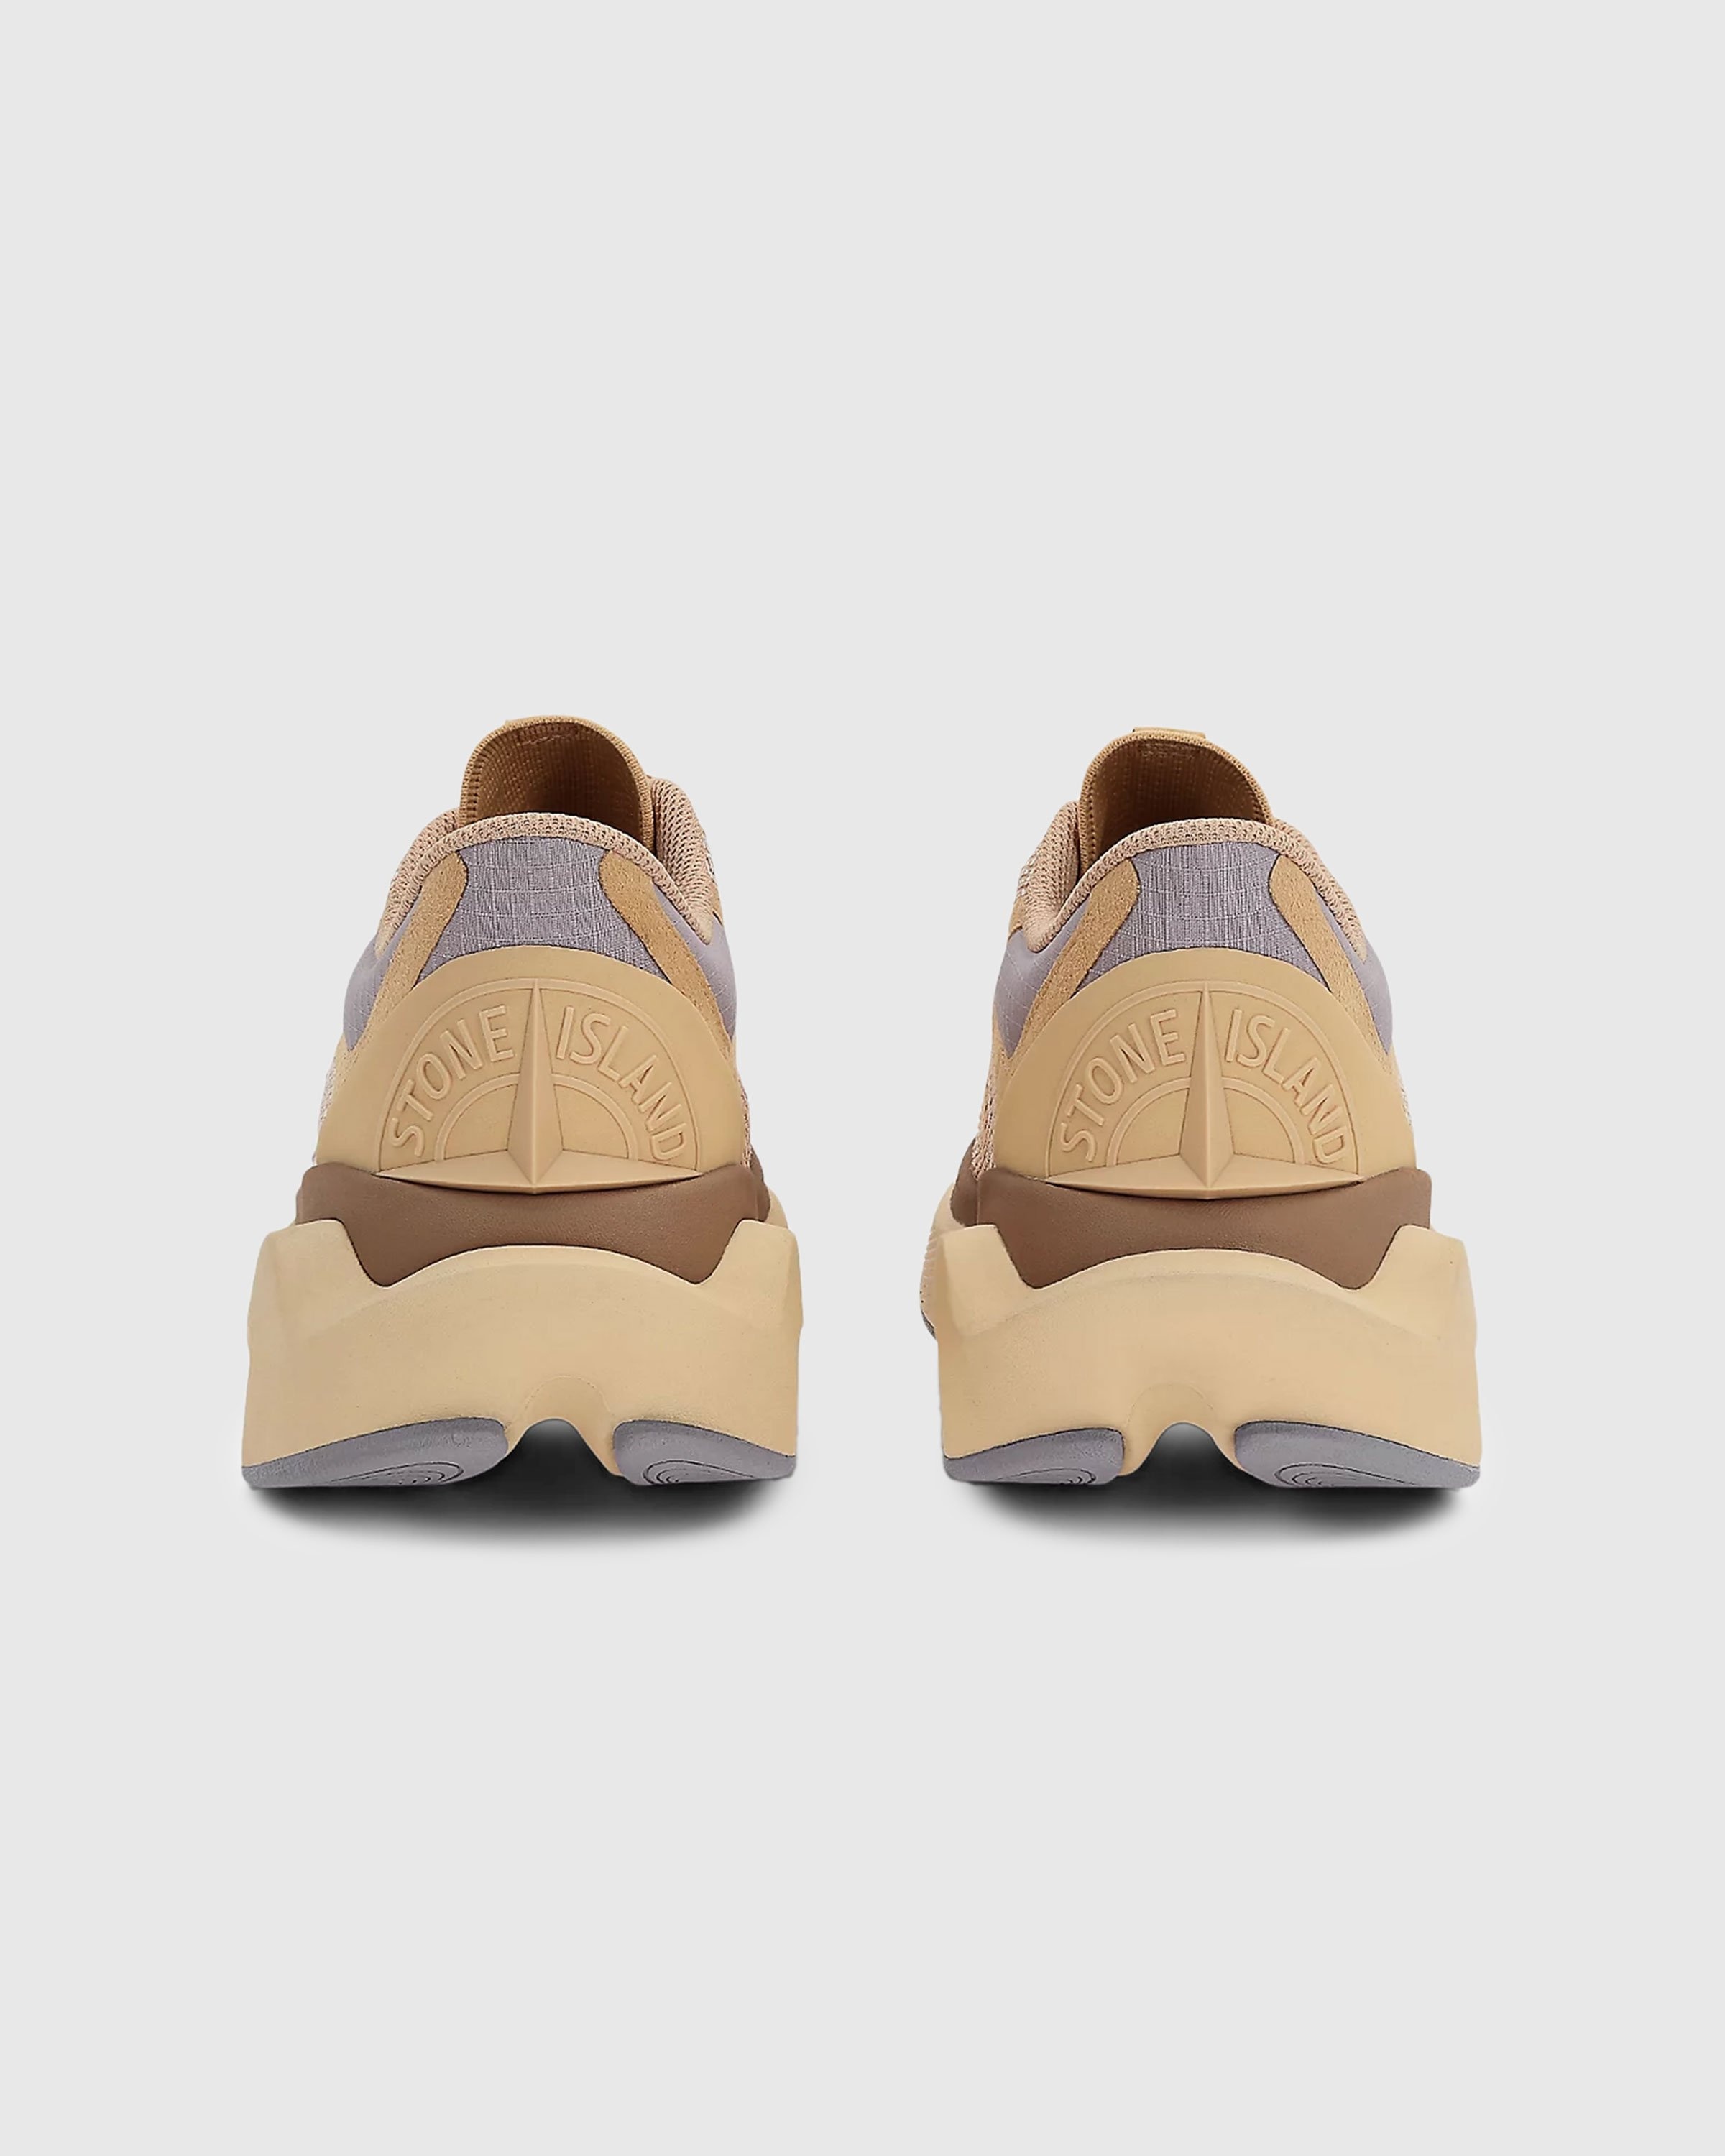 New Balance x Stone Island – TDS FuelCell C_1 Tan/Brown/Grey